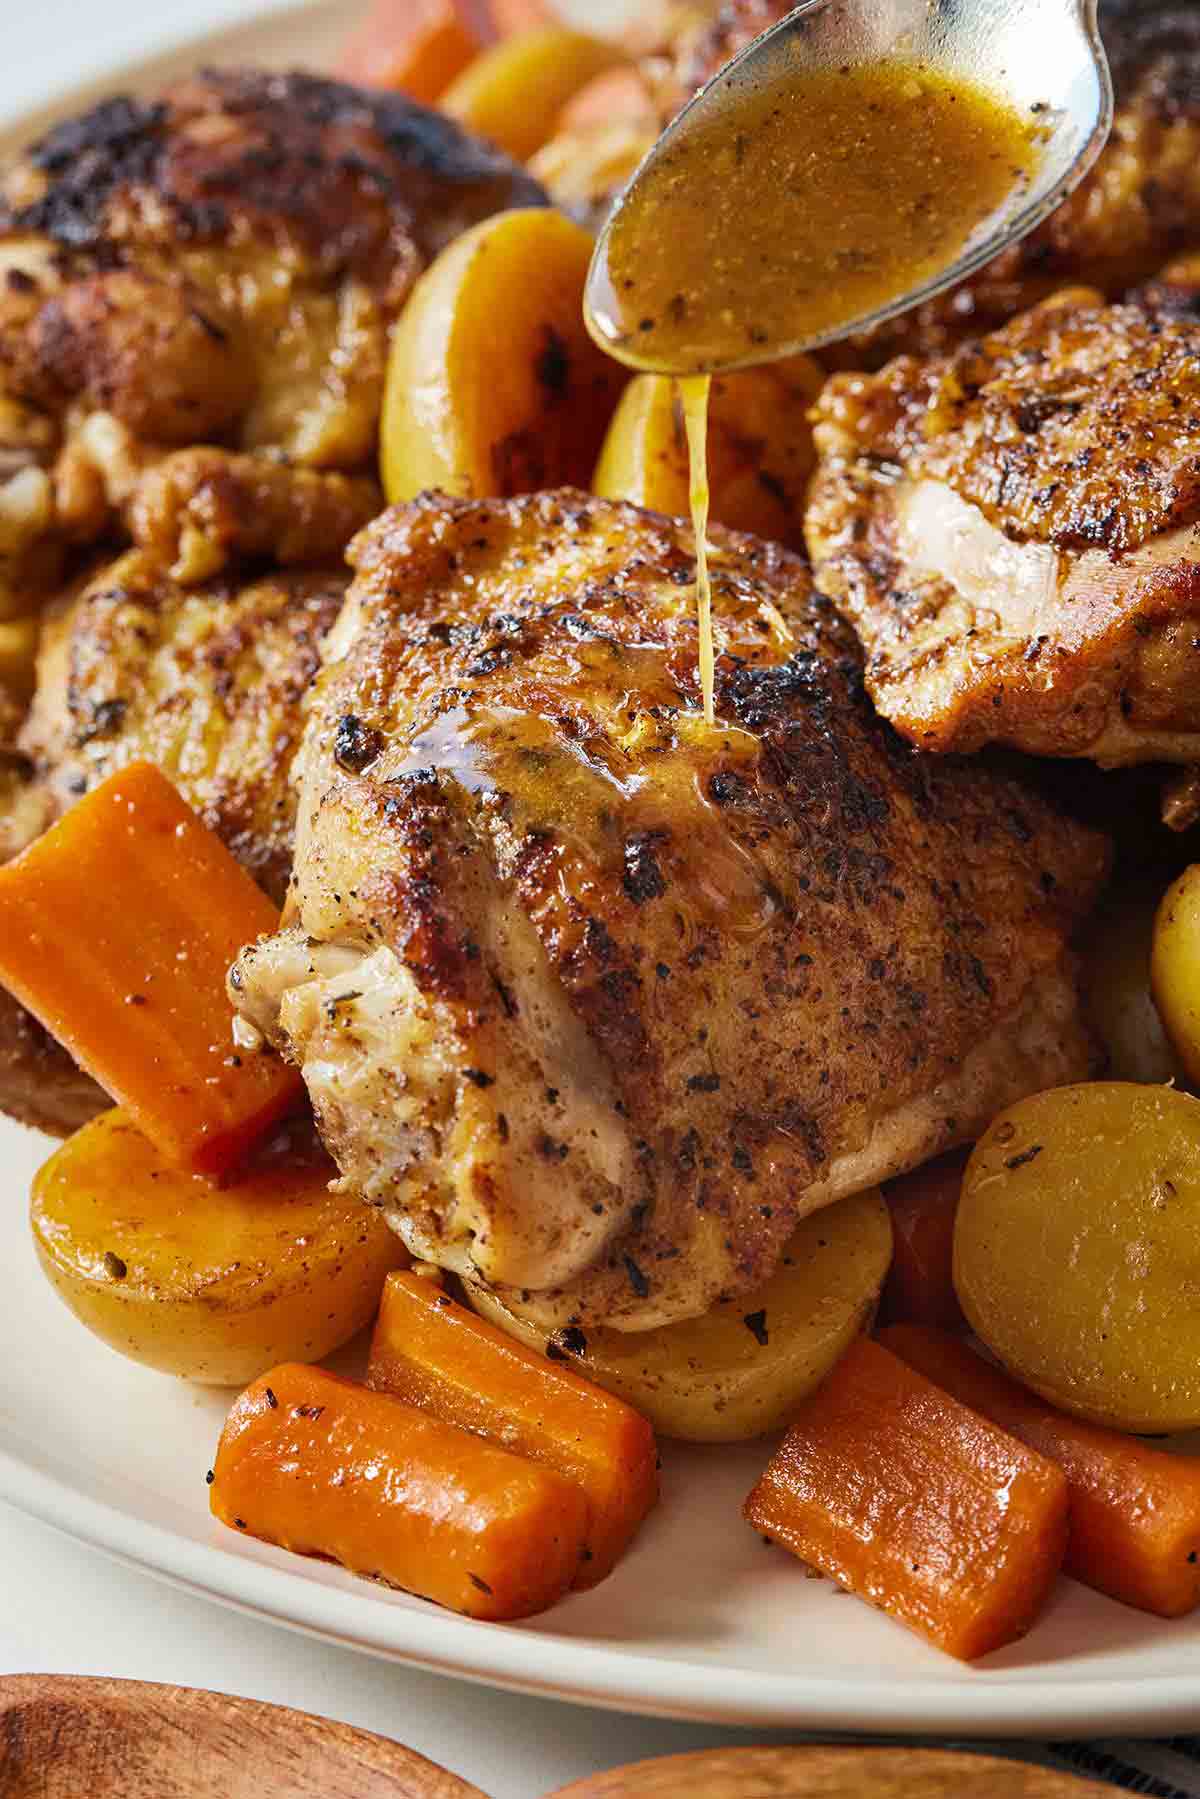 A spoon drizzling sauce over chicken thighs on a plate with carrots and potatoes.